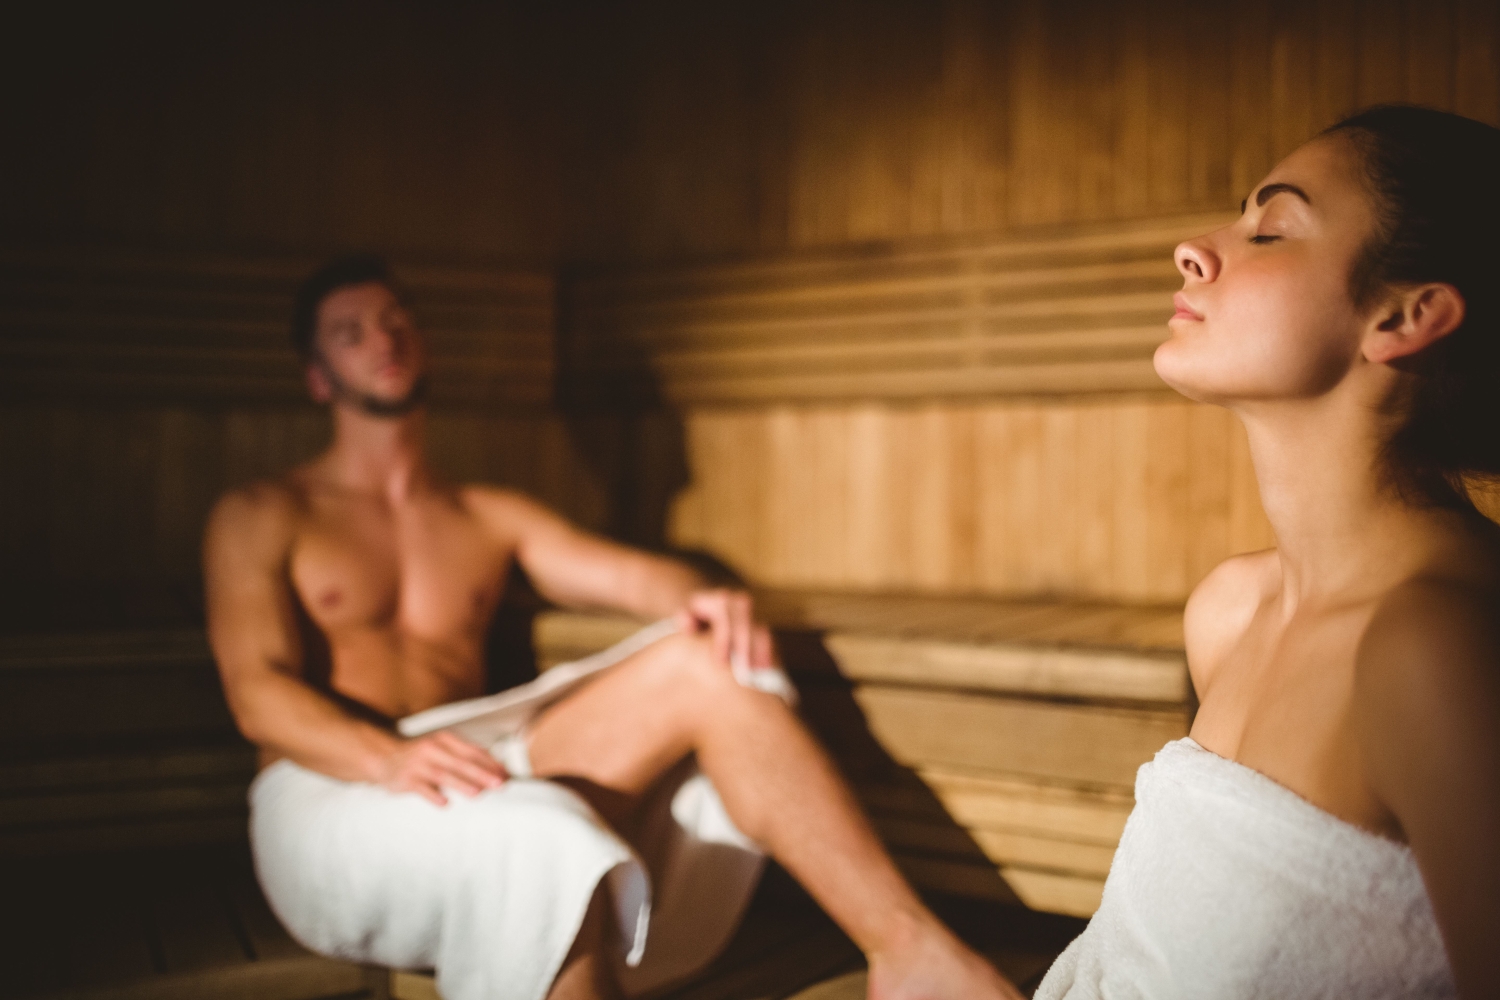 Man and woman in sauna